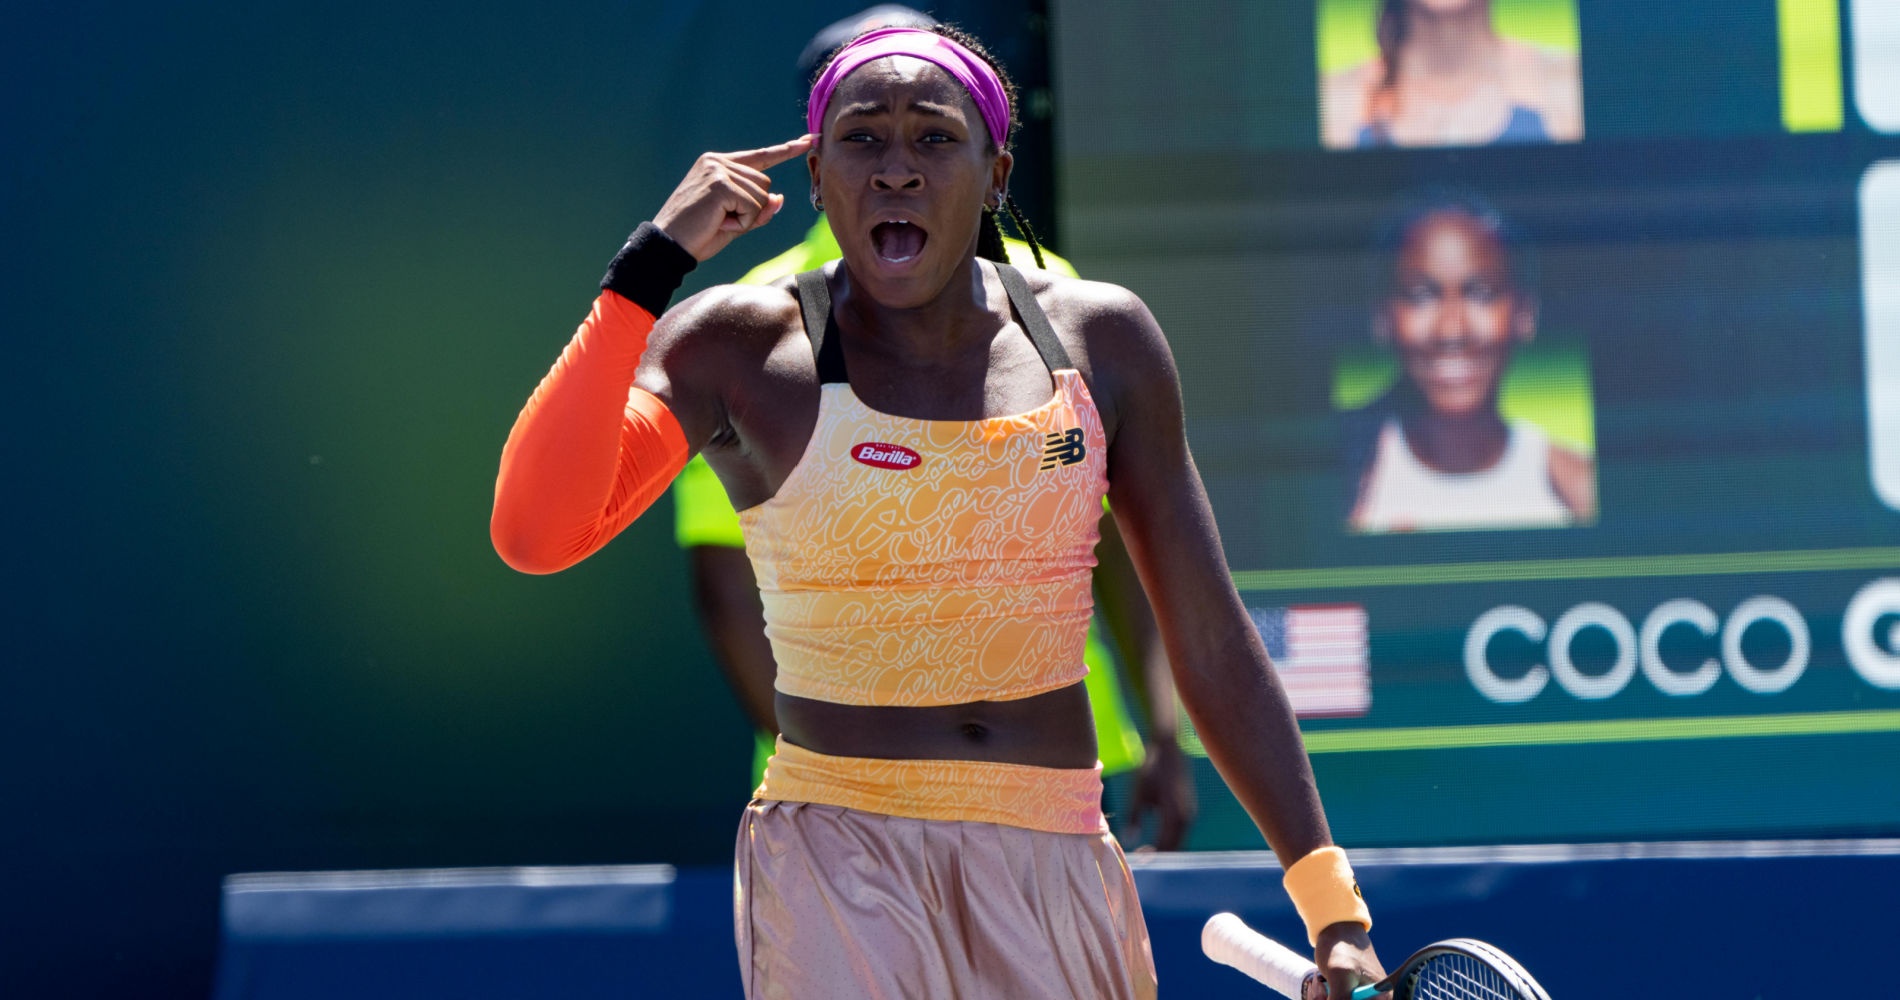 Women's Tennis, WTA Singles World Rankings - Complete list: Coco Gauff  remains in the top 3